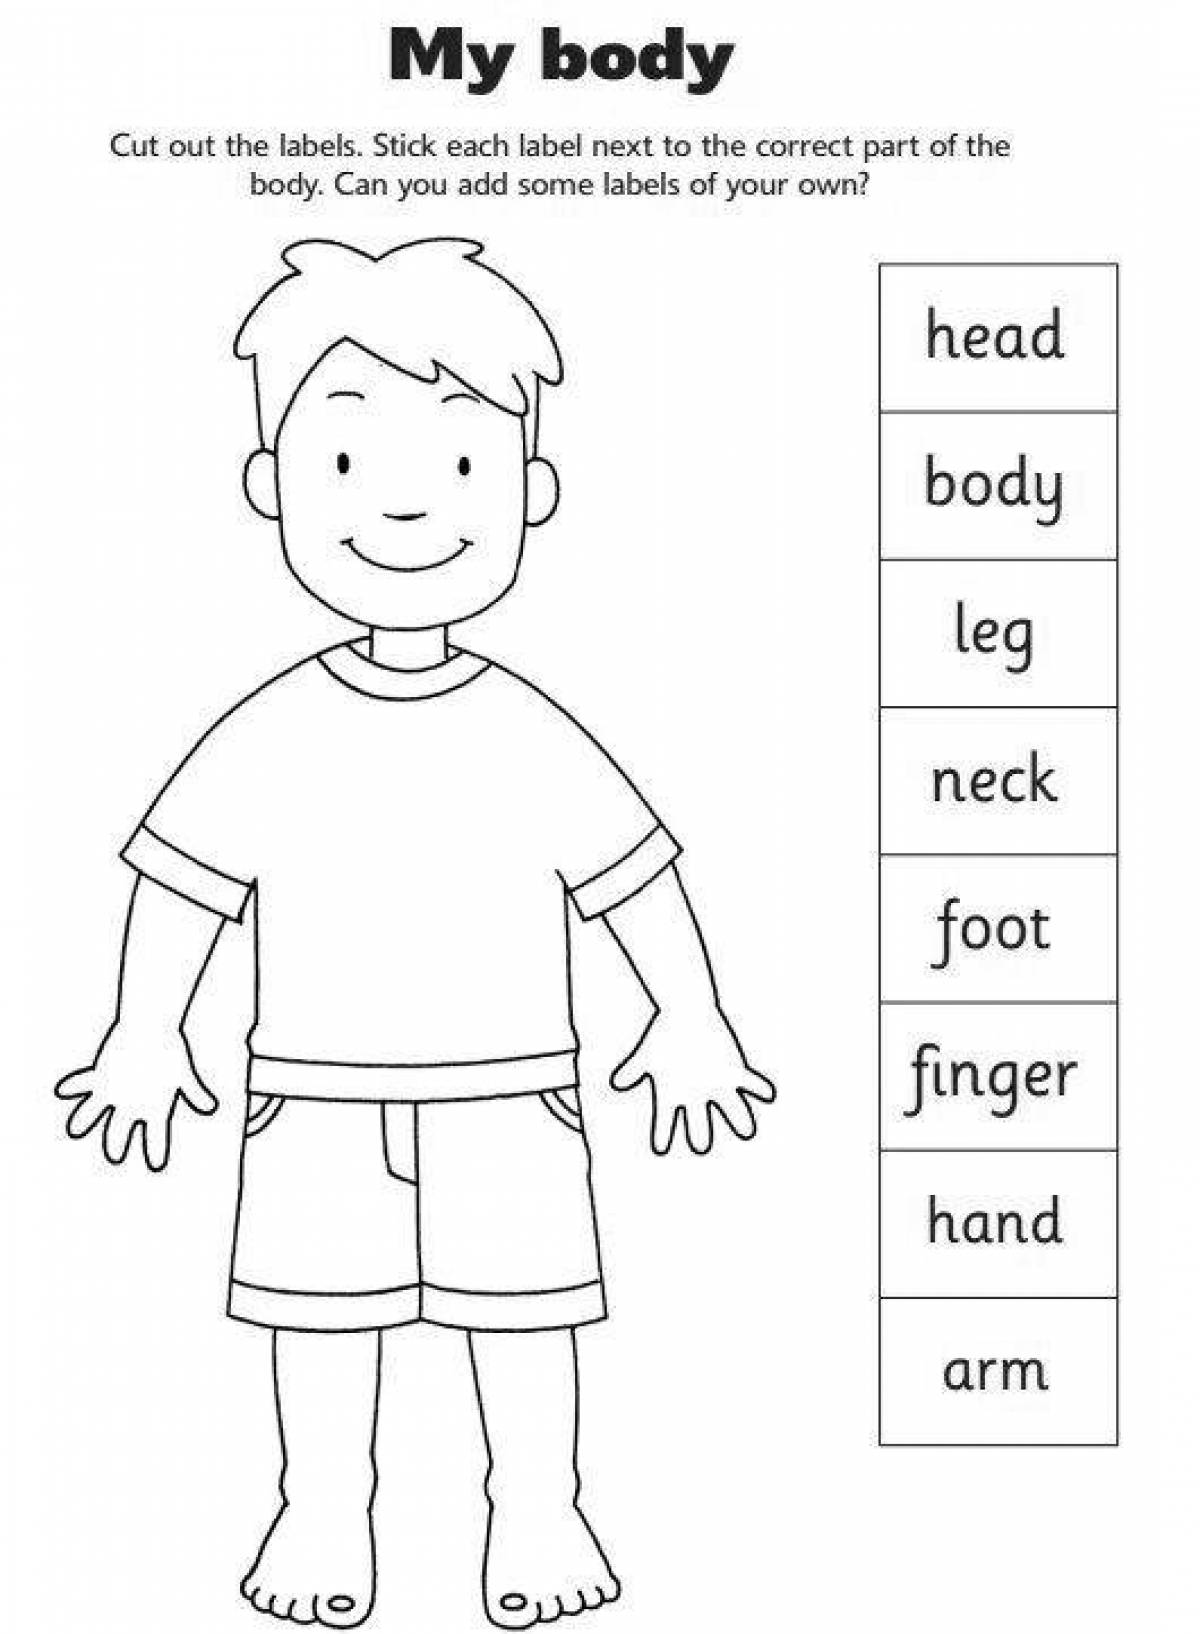 An entertaining coloring page of body parts in English